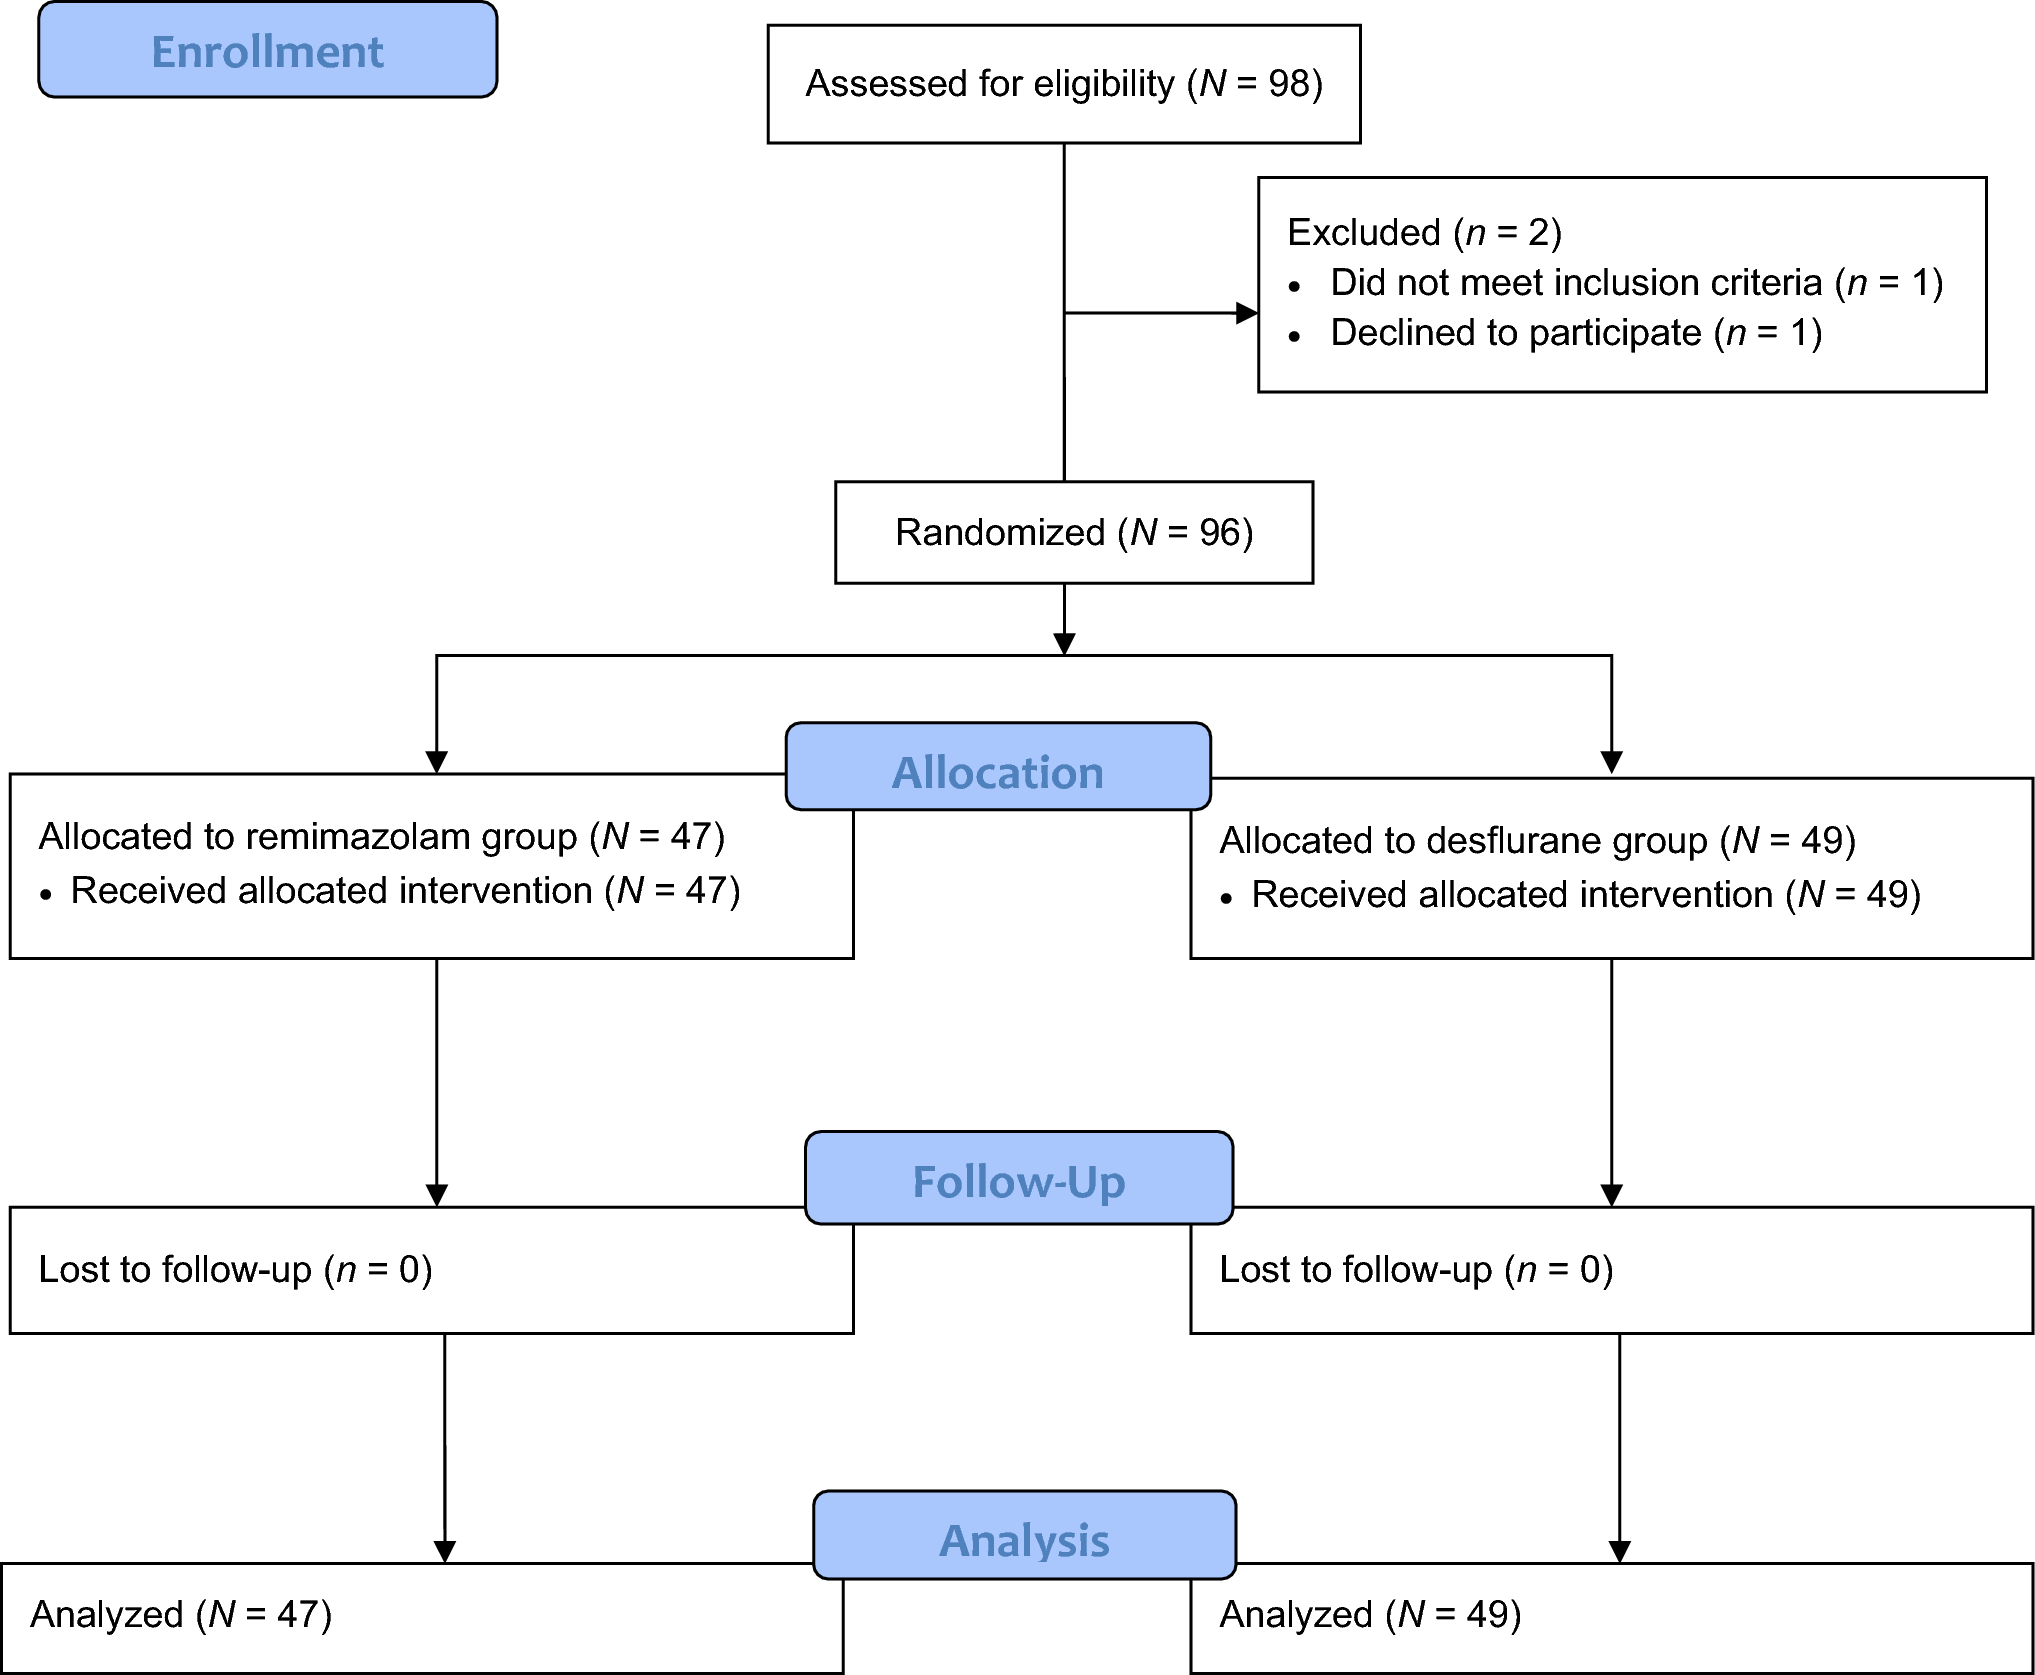 Remimazolam to prevent hemodynamic instability during catheter ablation under general anesthesia: a randomized controlled trial